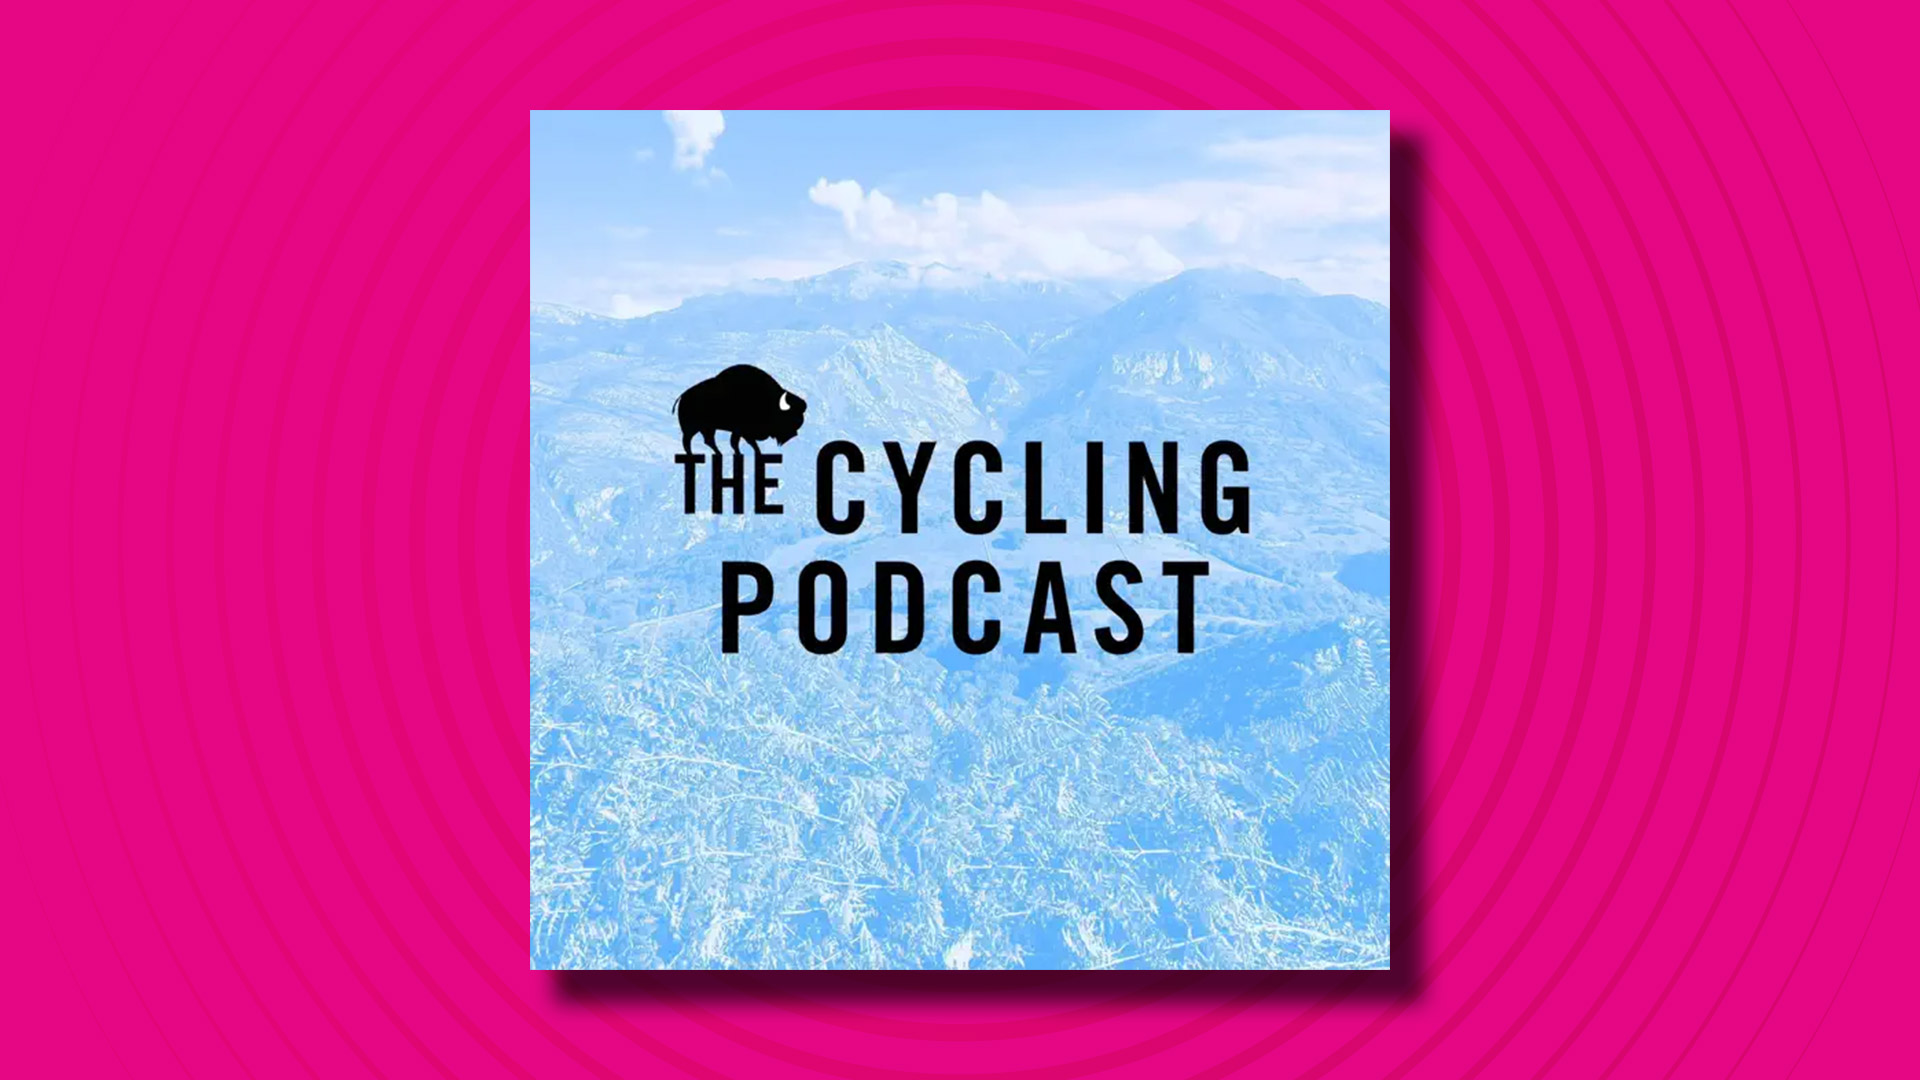 The logo of the Cycling Podcast podcast on a pink background